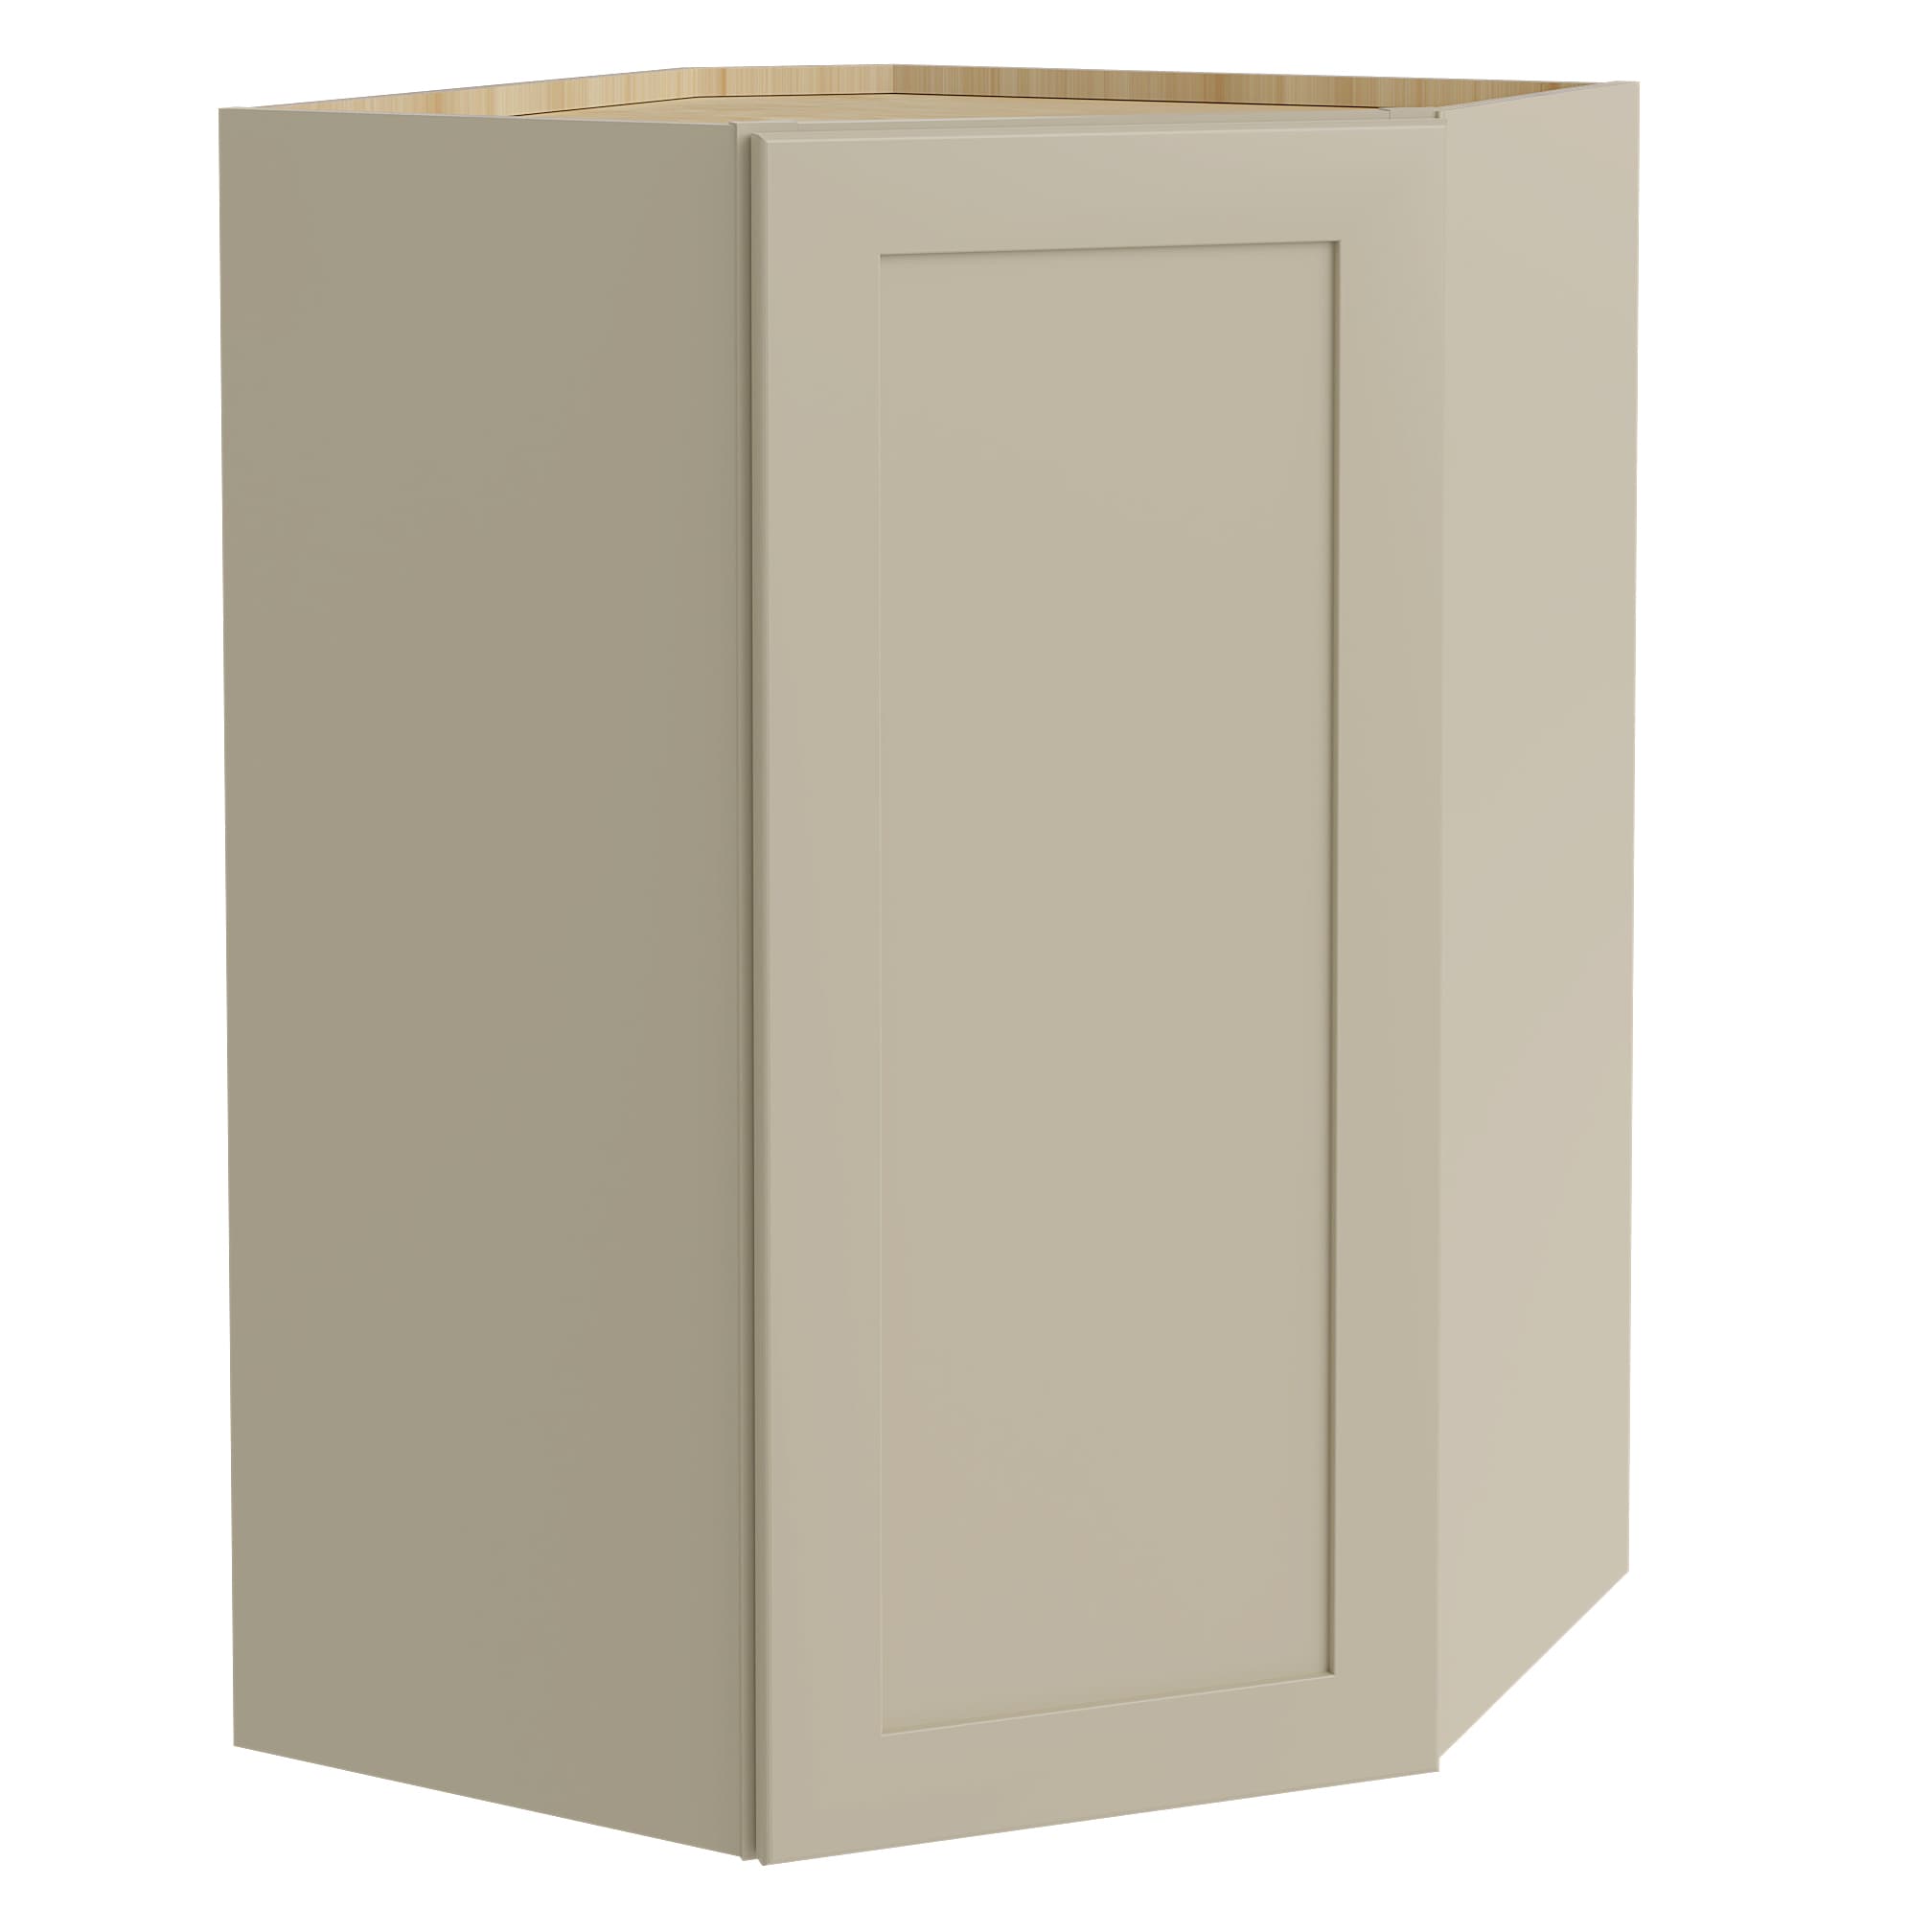 Luxxe Cabinetry 27-in W x 36-in H x 15-in D Norfolk Blended Cream Painted Blind Corner Wall Fully Assembled Semi-custom Cabinet in Off-White